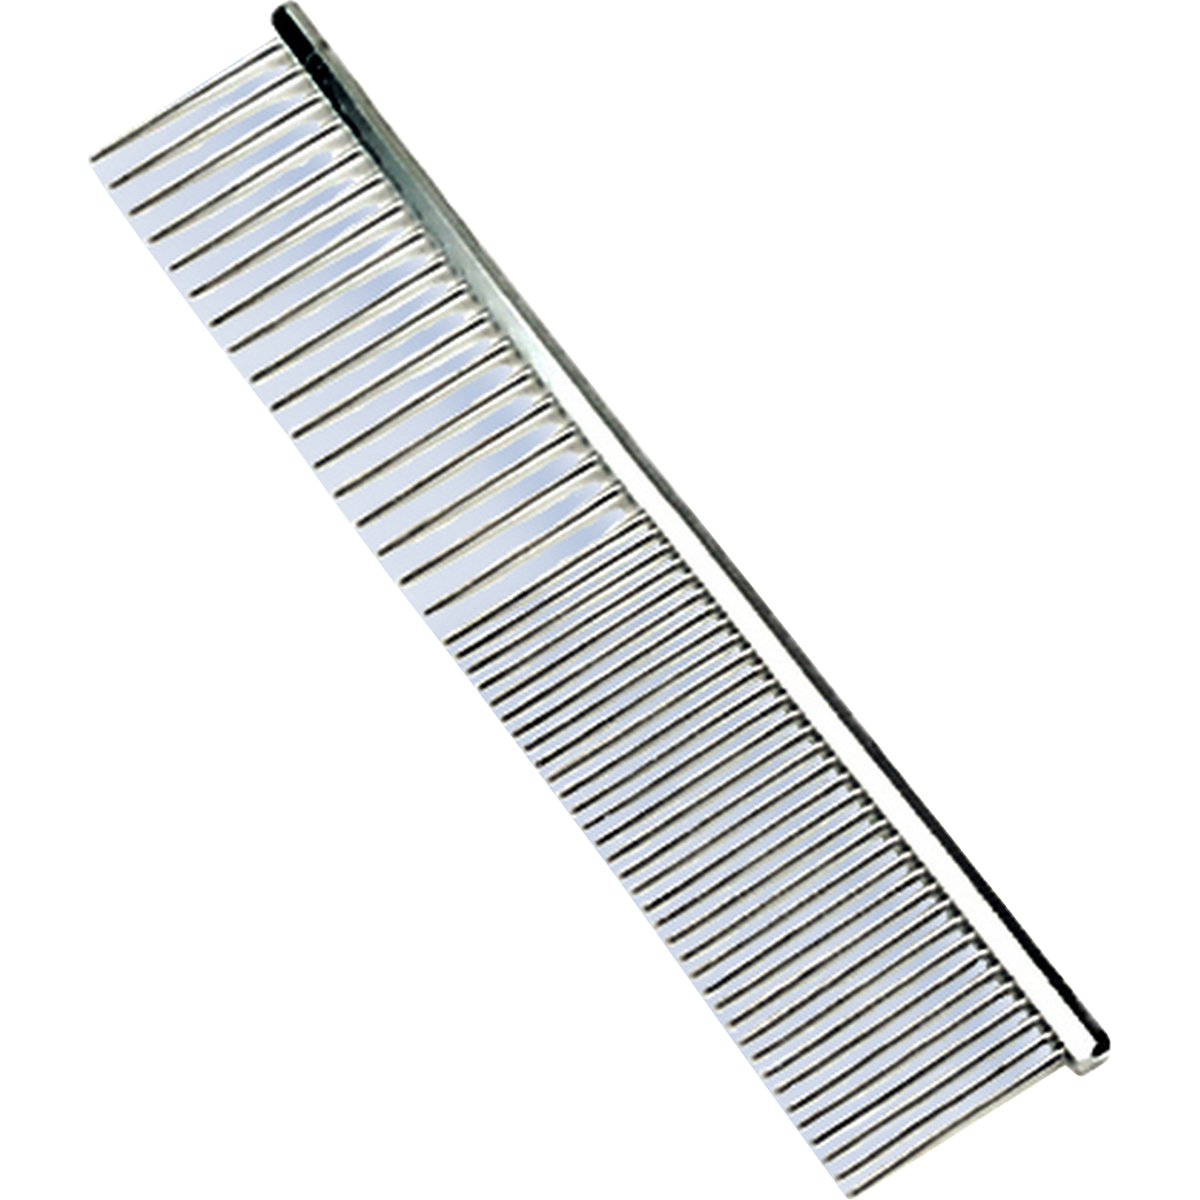 Picture of Coastal Pet Products W556 7.25 in. Safari Dog Grooming Comb